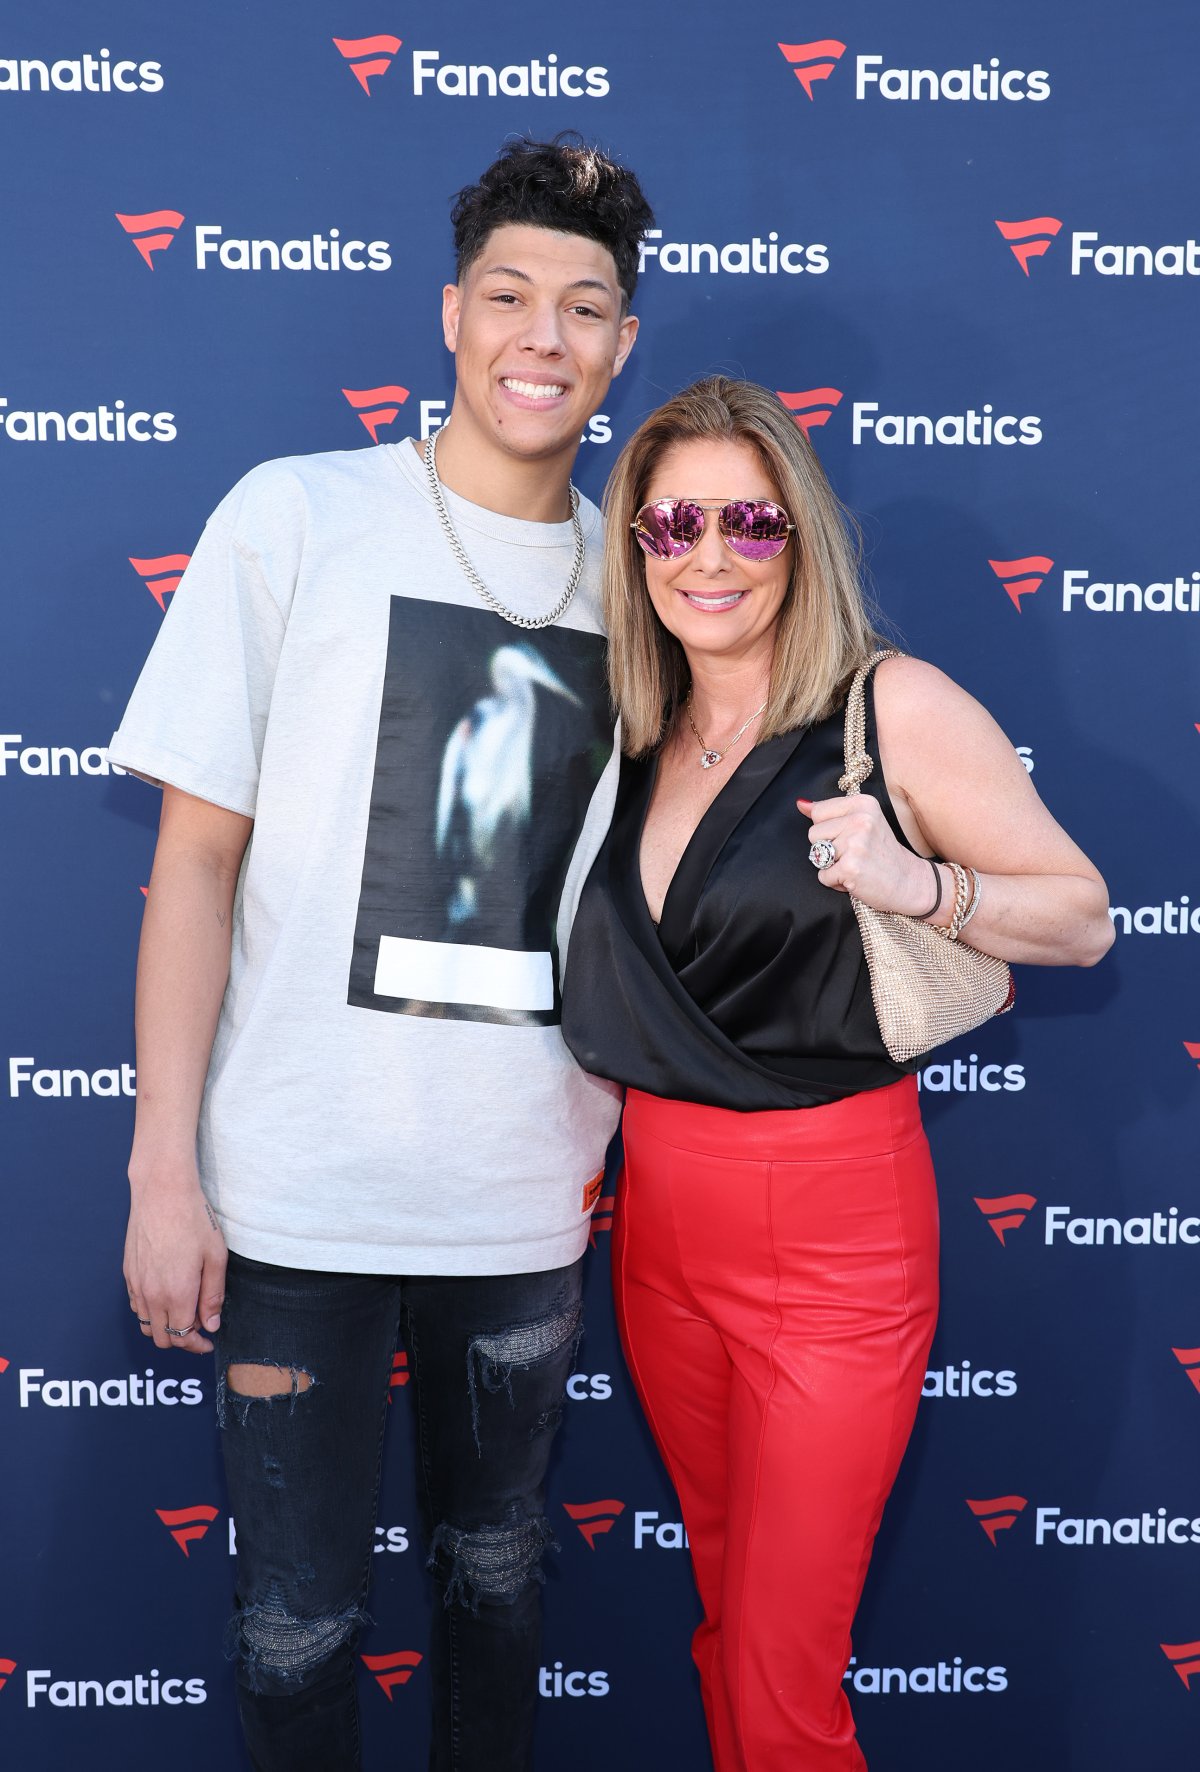 Share to your moms feiends, patrickmahomes